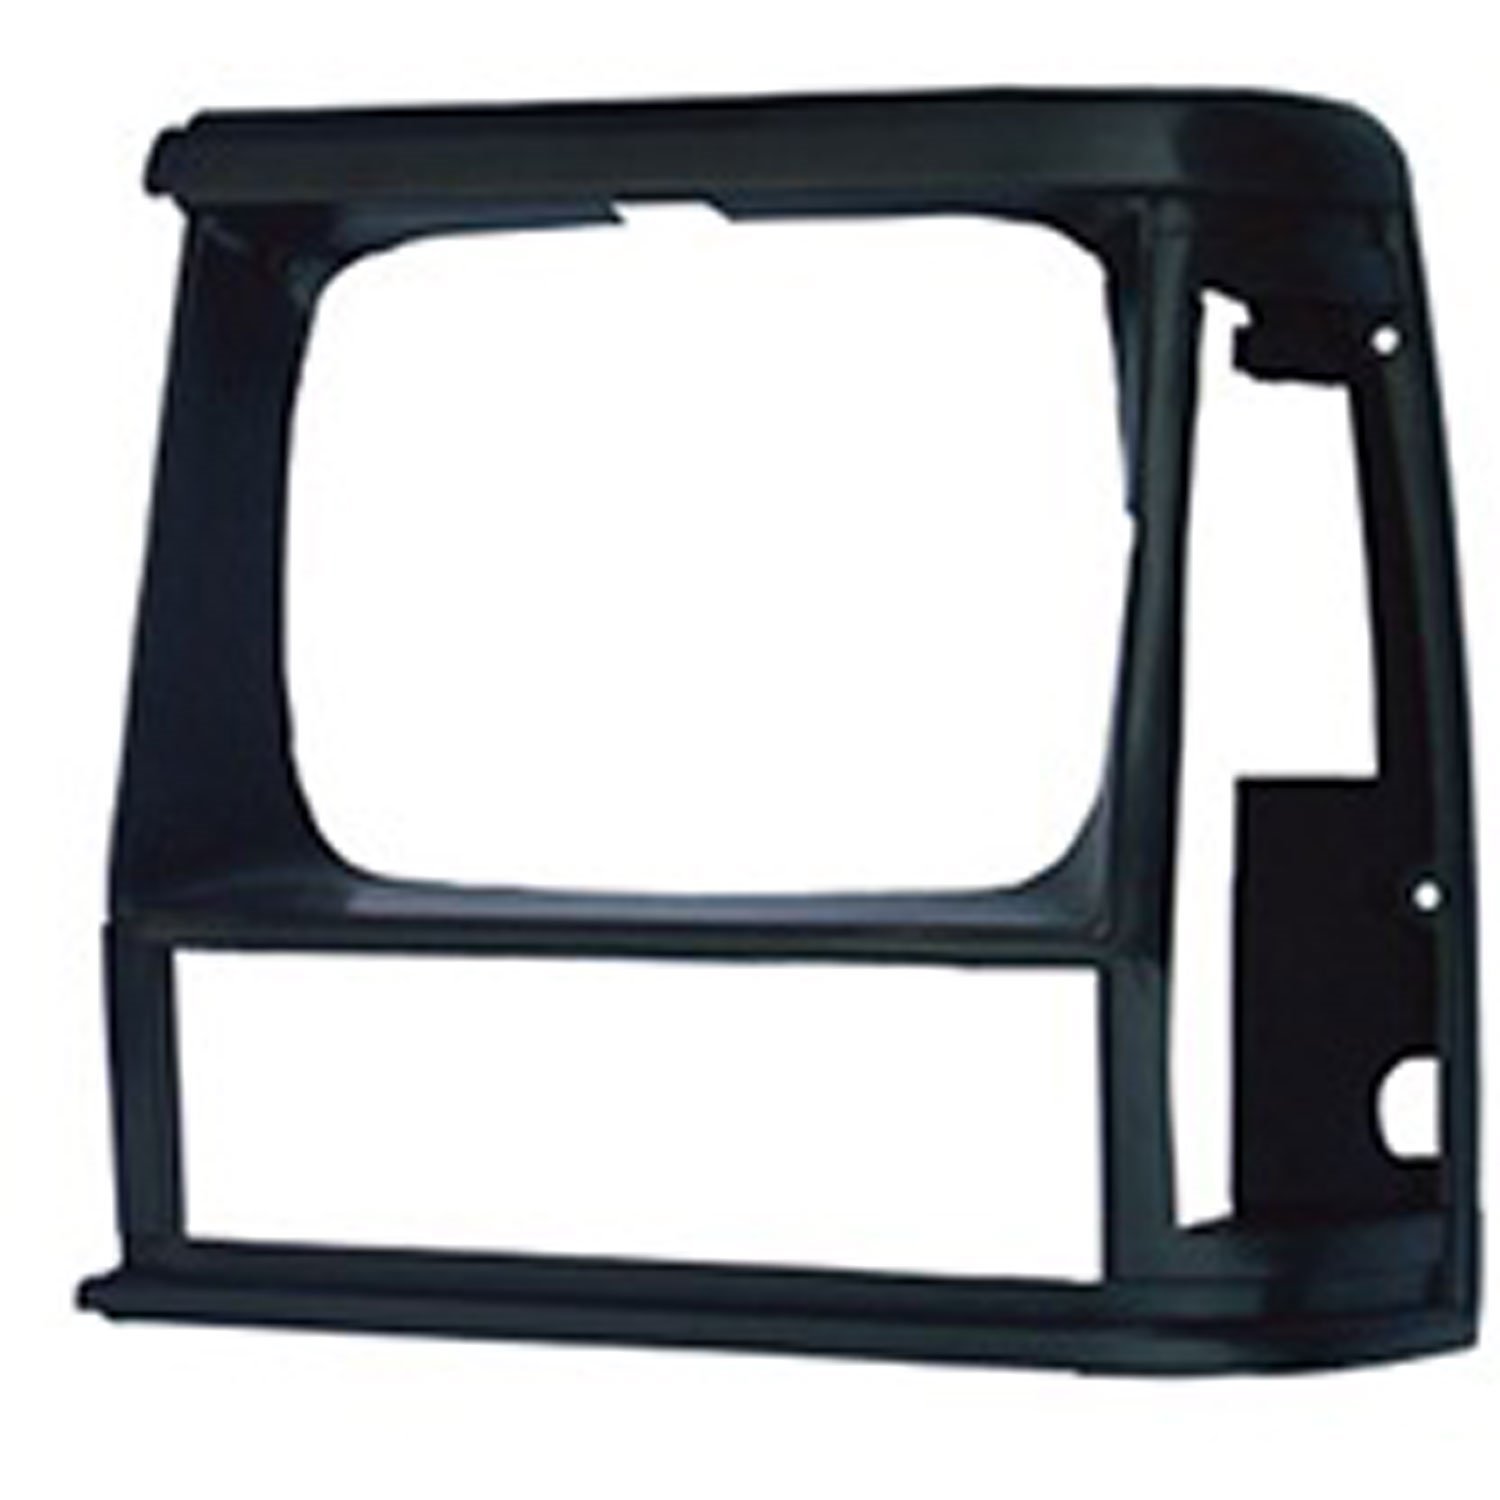 This Gray headlight bezel from Omix-ADA fits the left side on 84-90 Jeep Cherokee XJ.